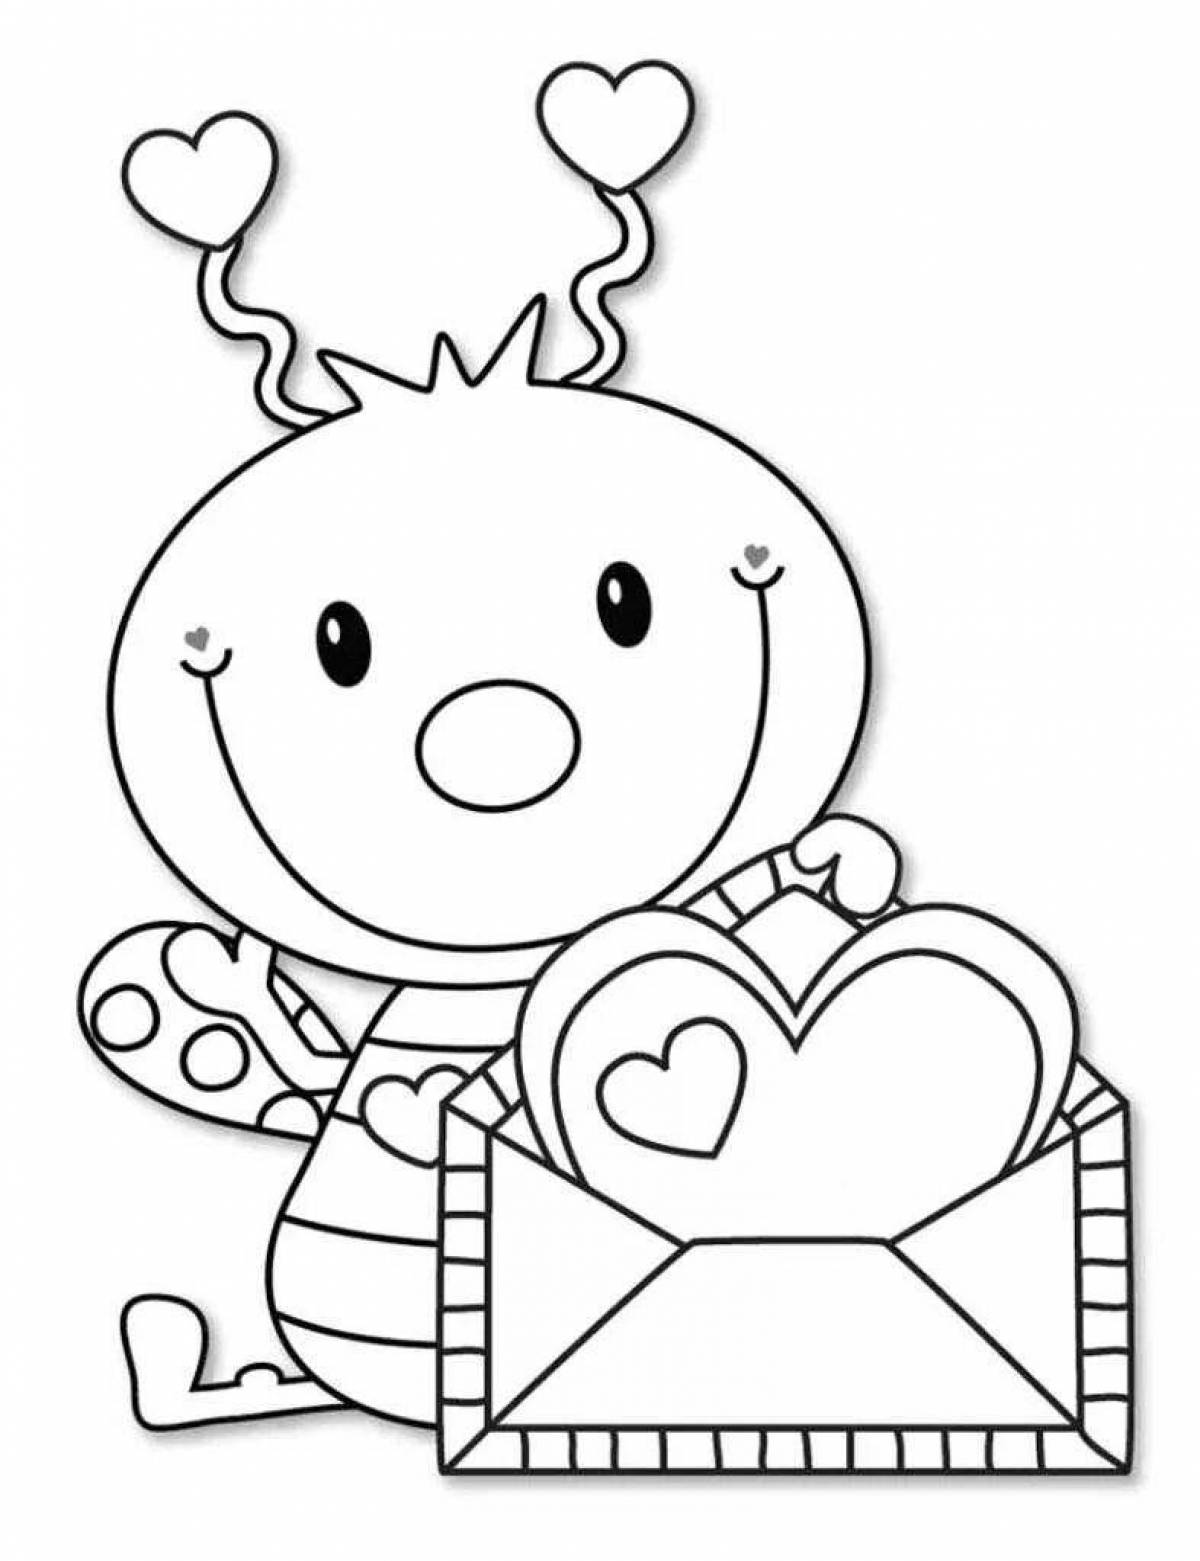 Wonderful valentine coloring pages for valentine's day for kids